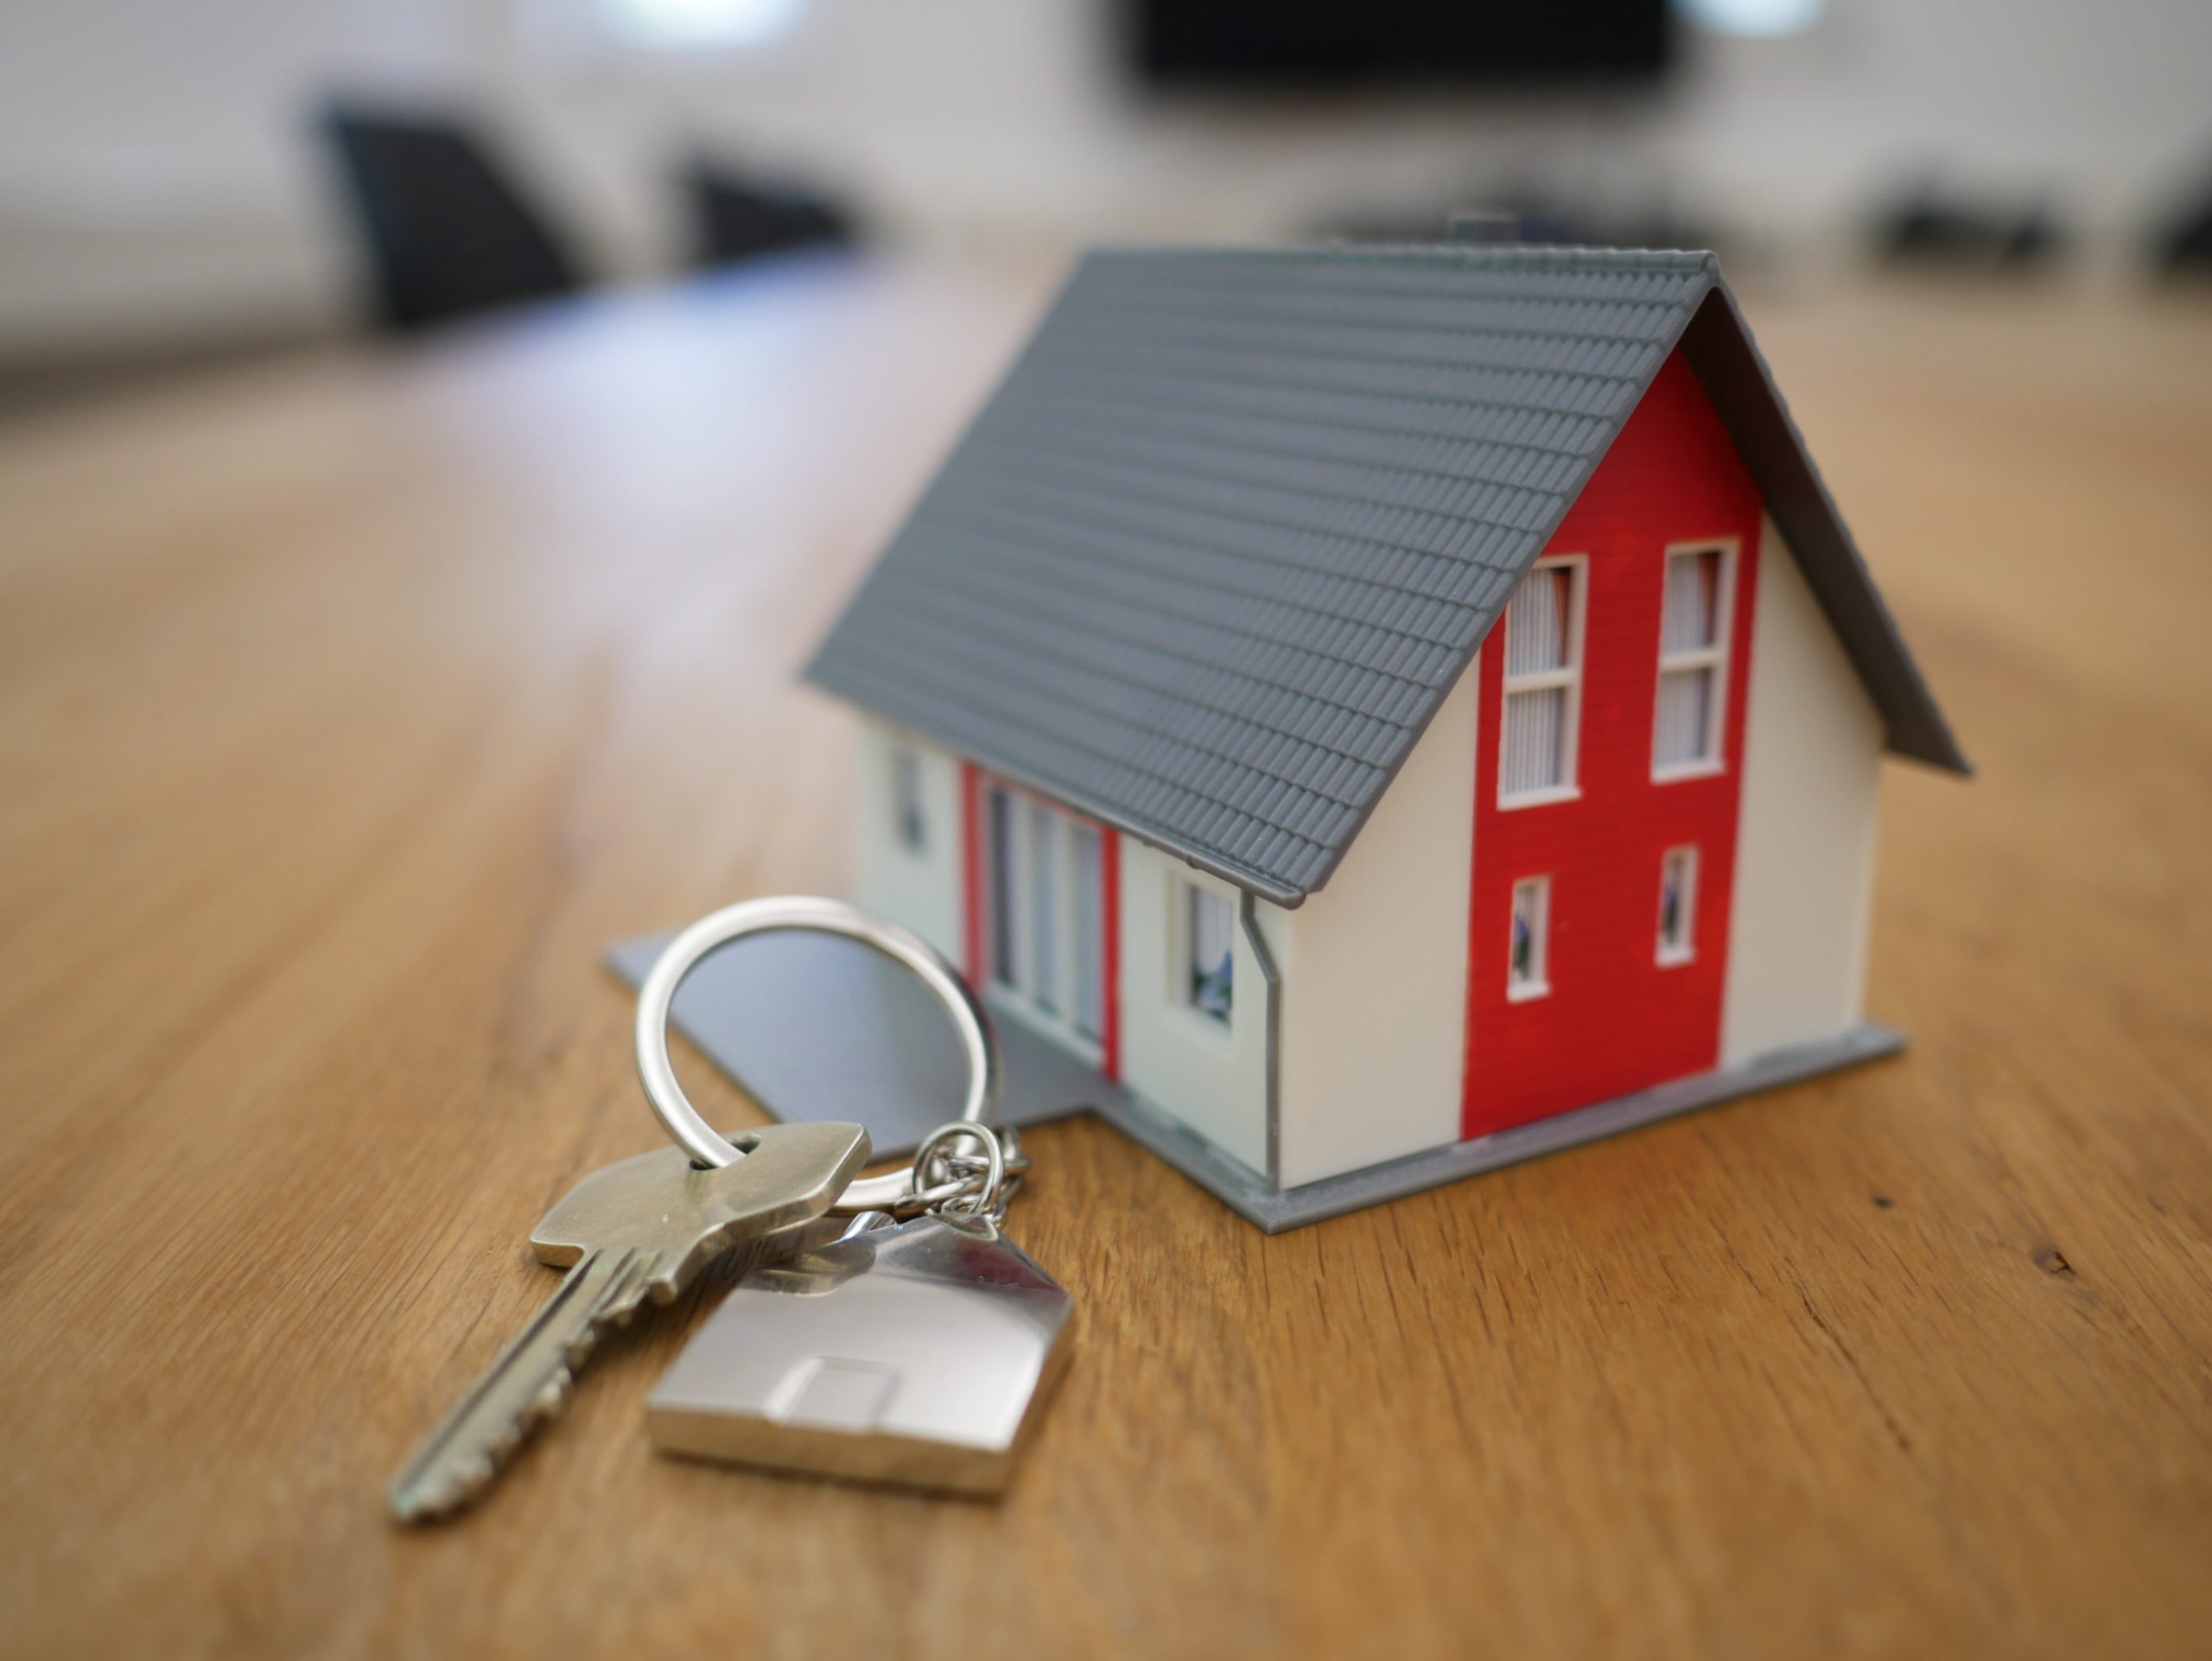 Picture of a toy house and key